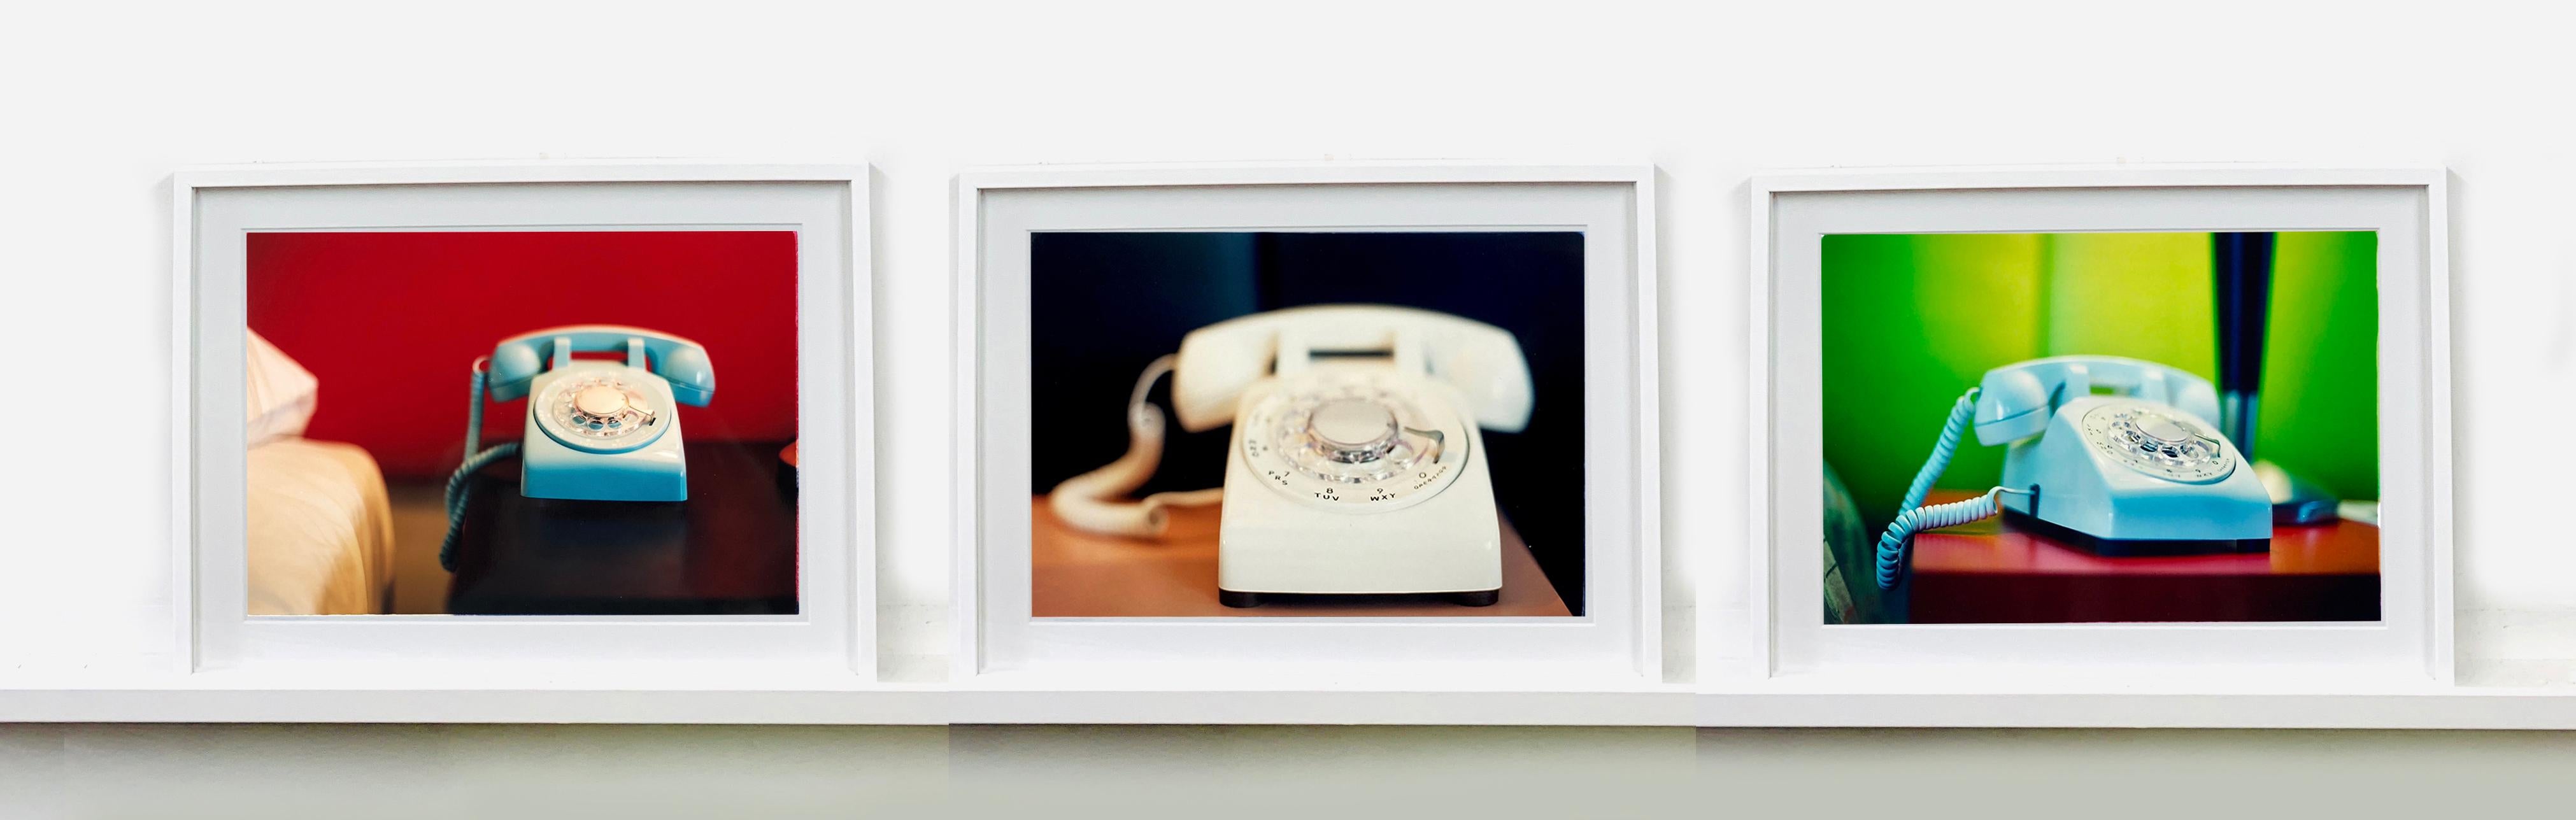 'Telephone VII' part of Richard Heeps 'Dream in Colour' Series. 
This cool Palm Springs interior photography featuring a vintage telephone on a nightstand combines  bright contrasting green, red and blue color tones and dreamy nostalgic mid-century